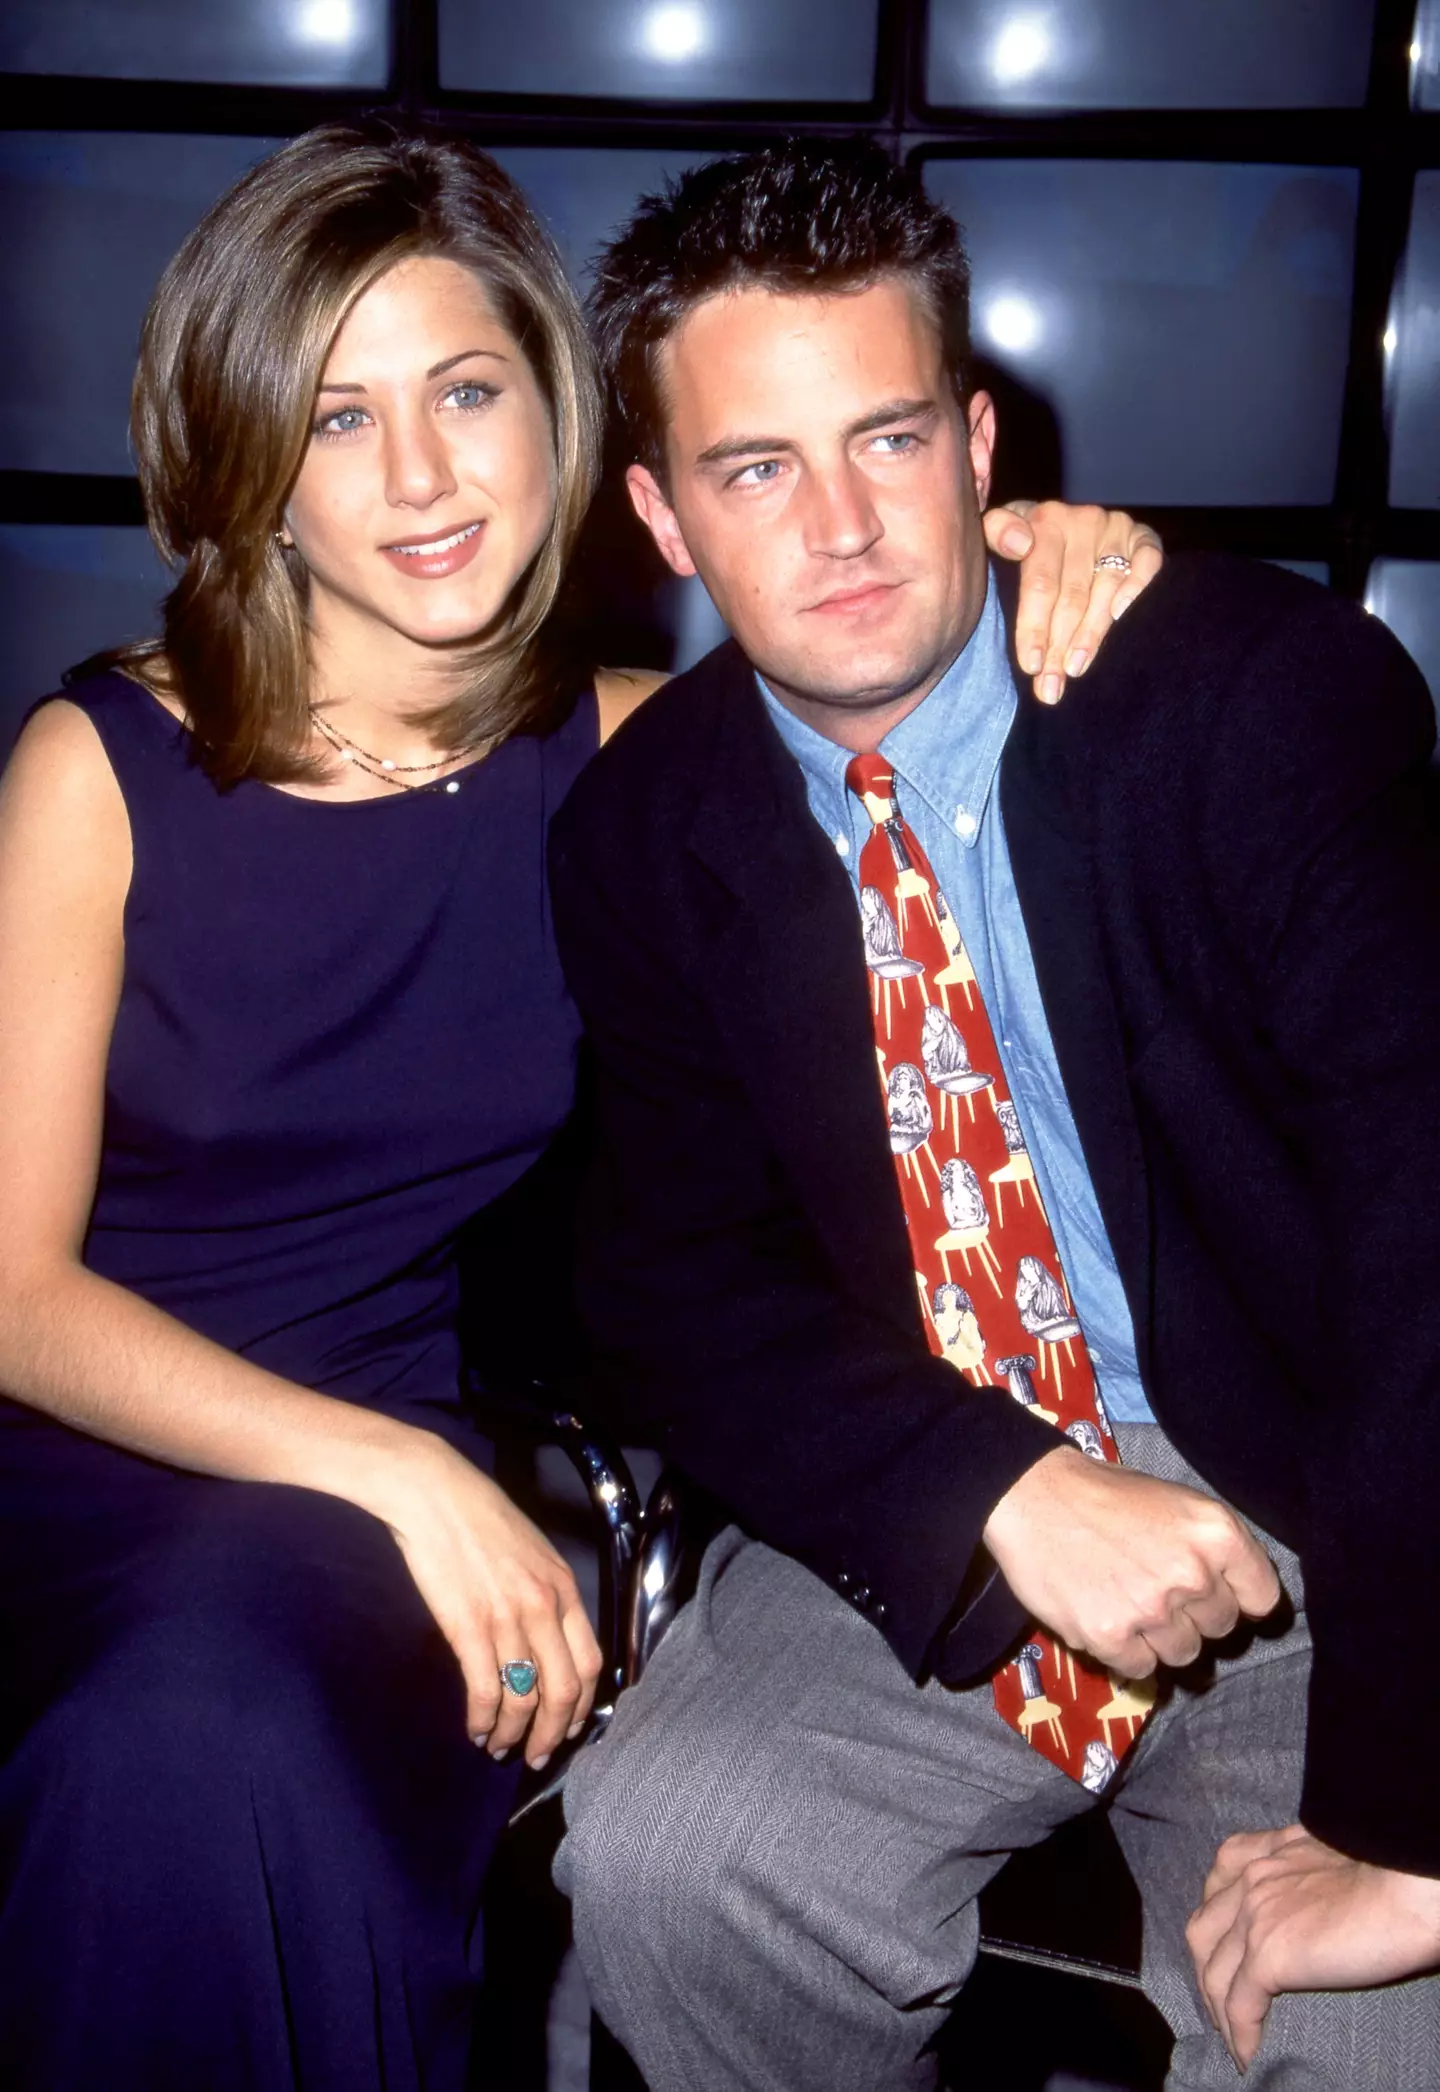 Matthew Perry and Rachel Aniston starred on Friends together.